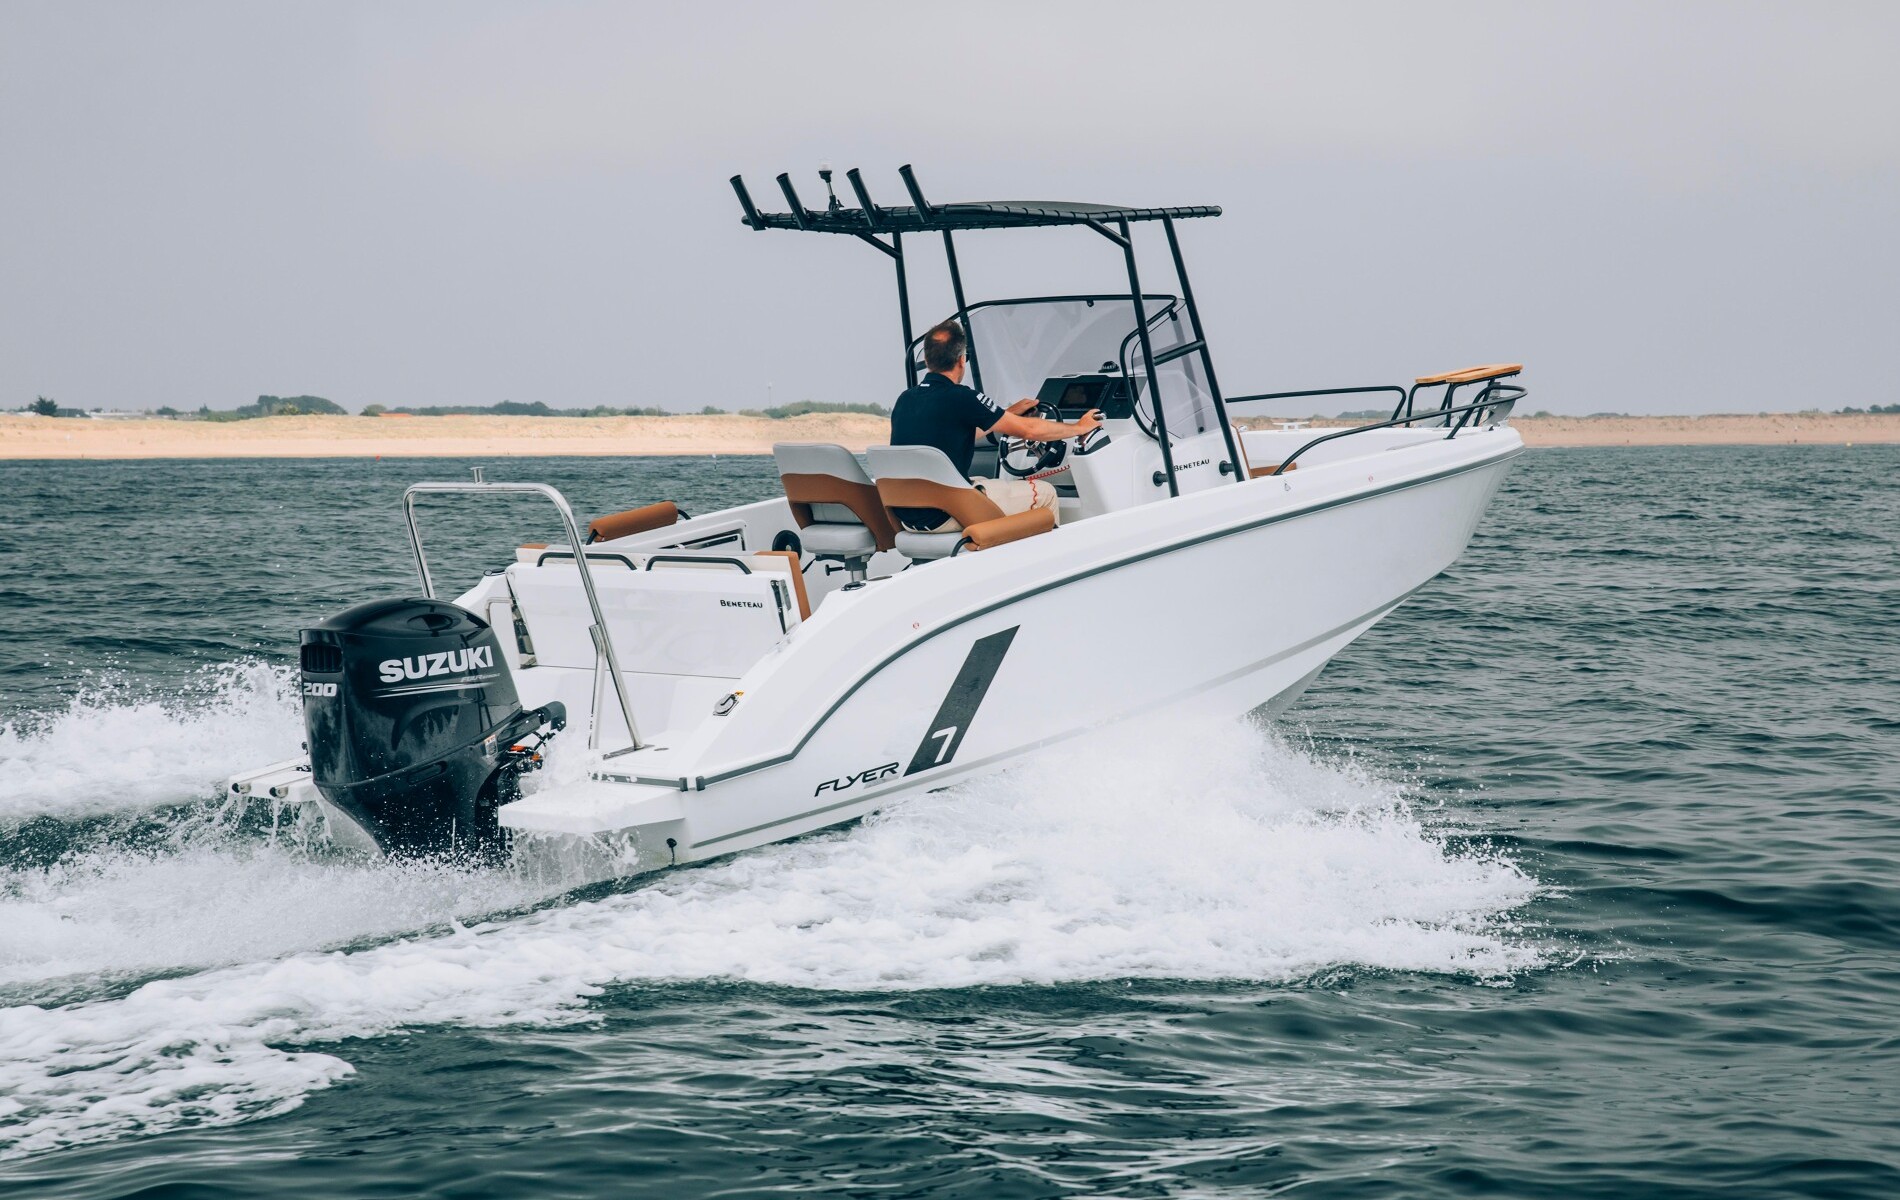 The FLYER 7 SPACEdeck by Beneteau Outboard